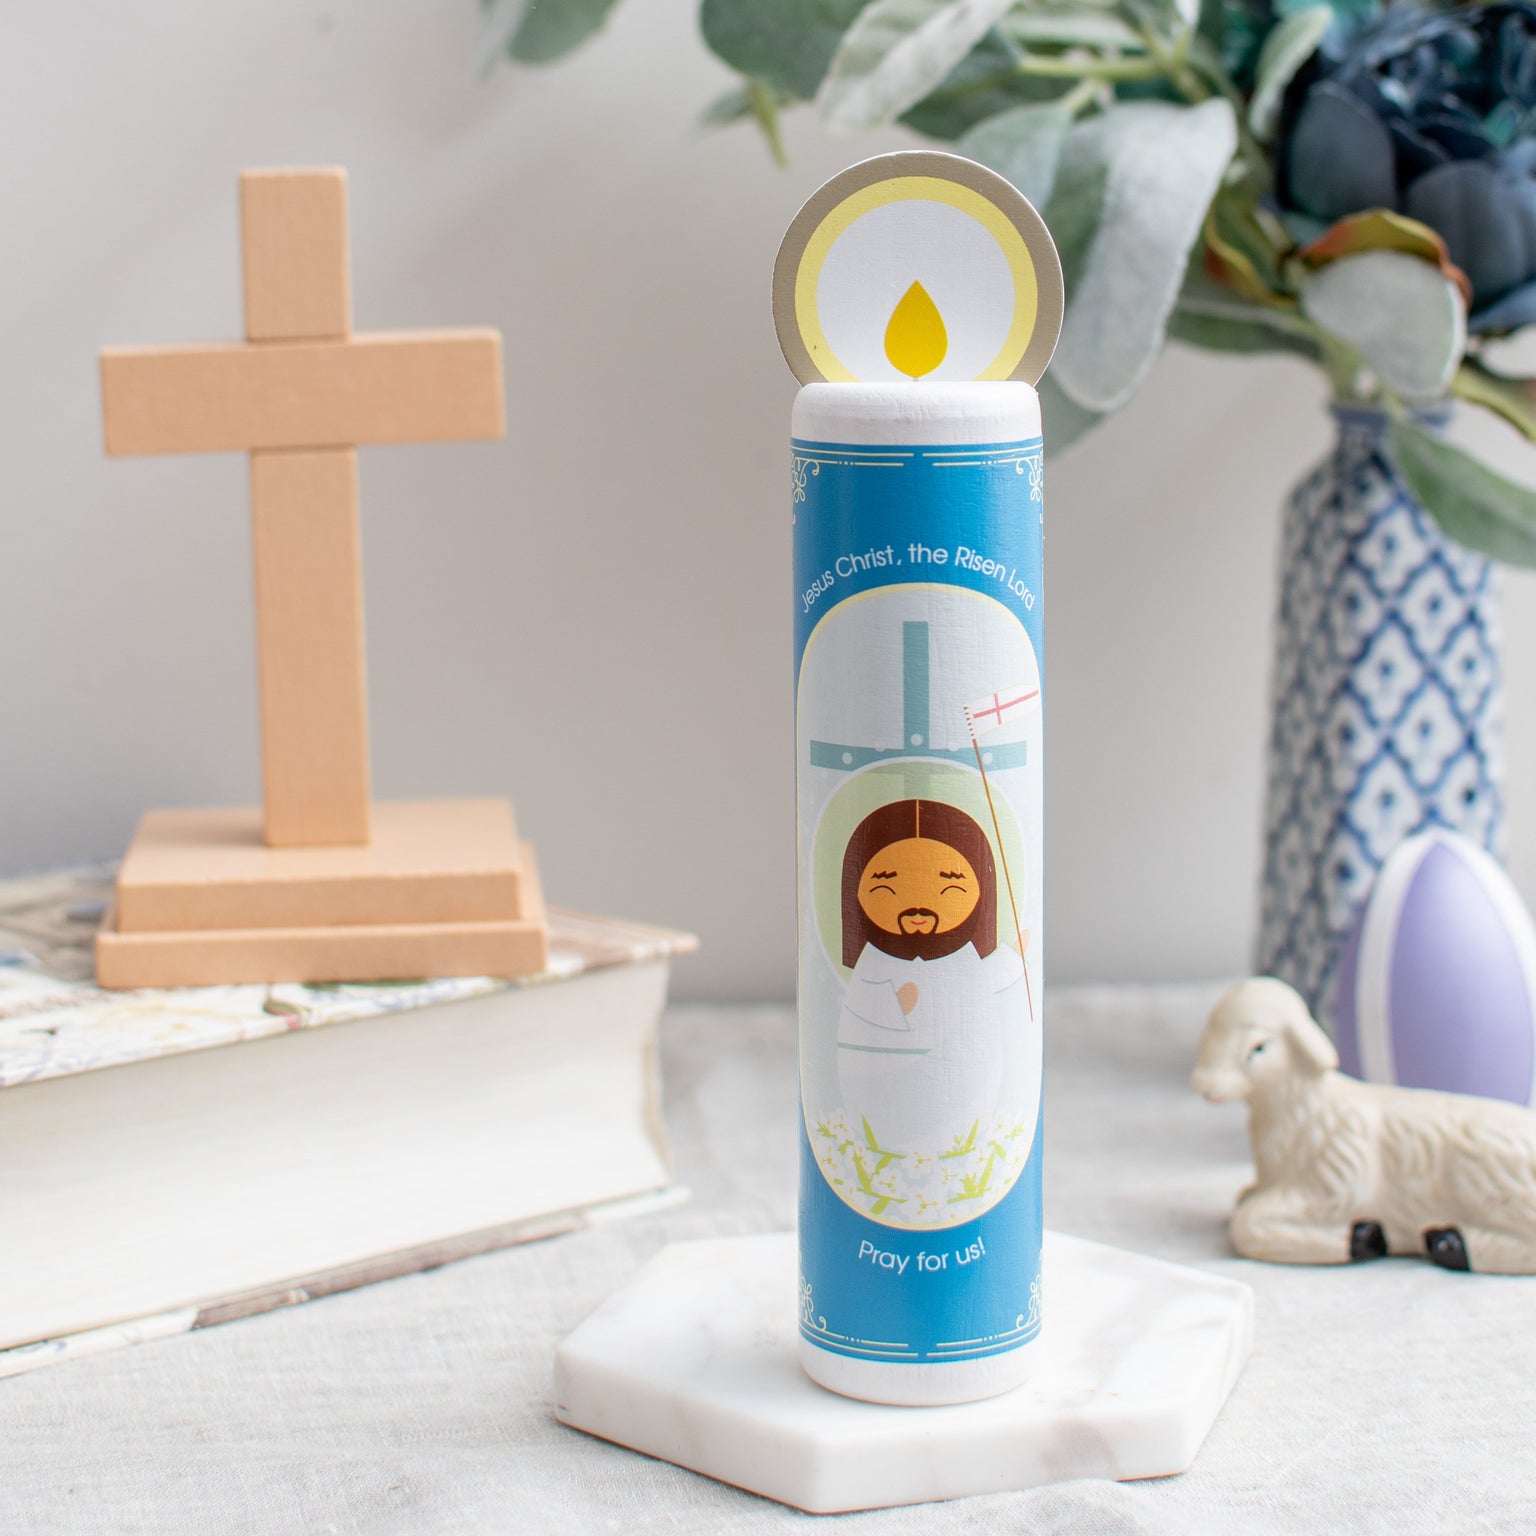 Jesus Christ, the Risen Lord (Eternal Rest prayer for the deceased) Wooden Prayer Candle